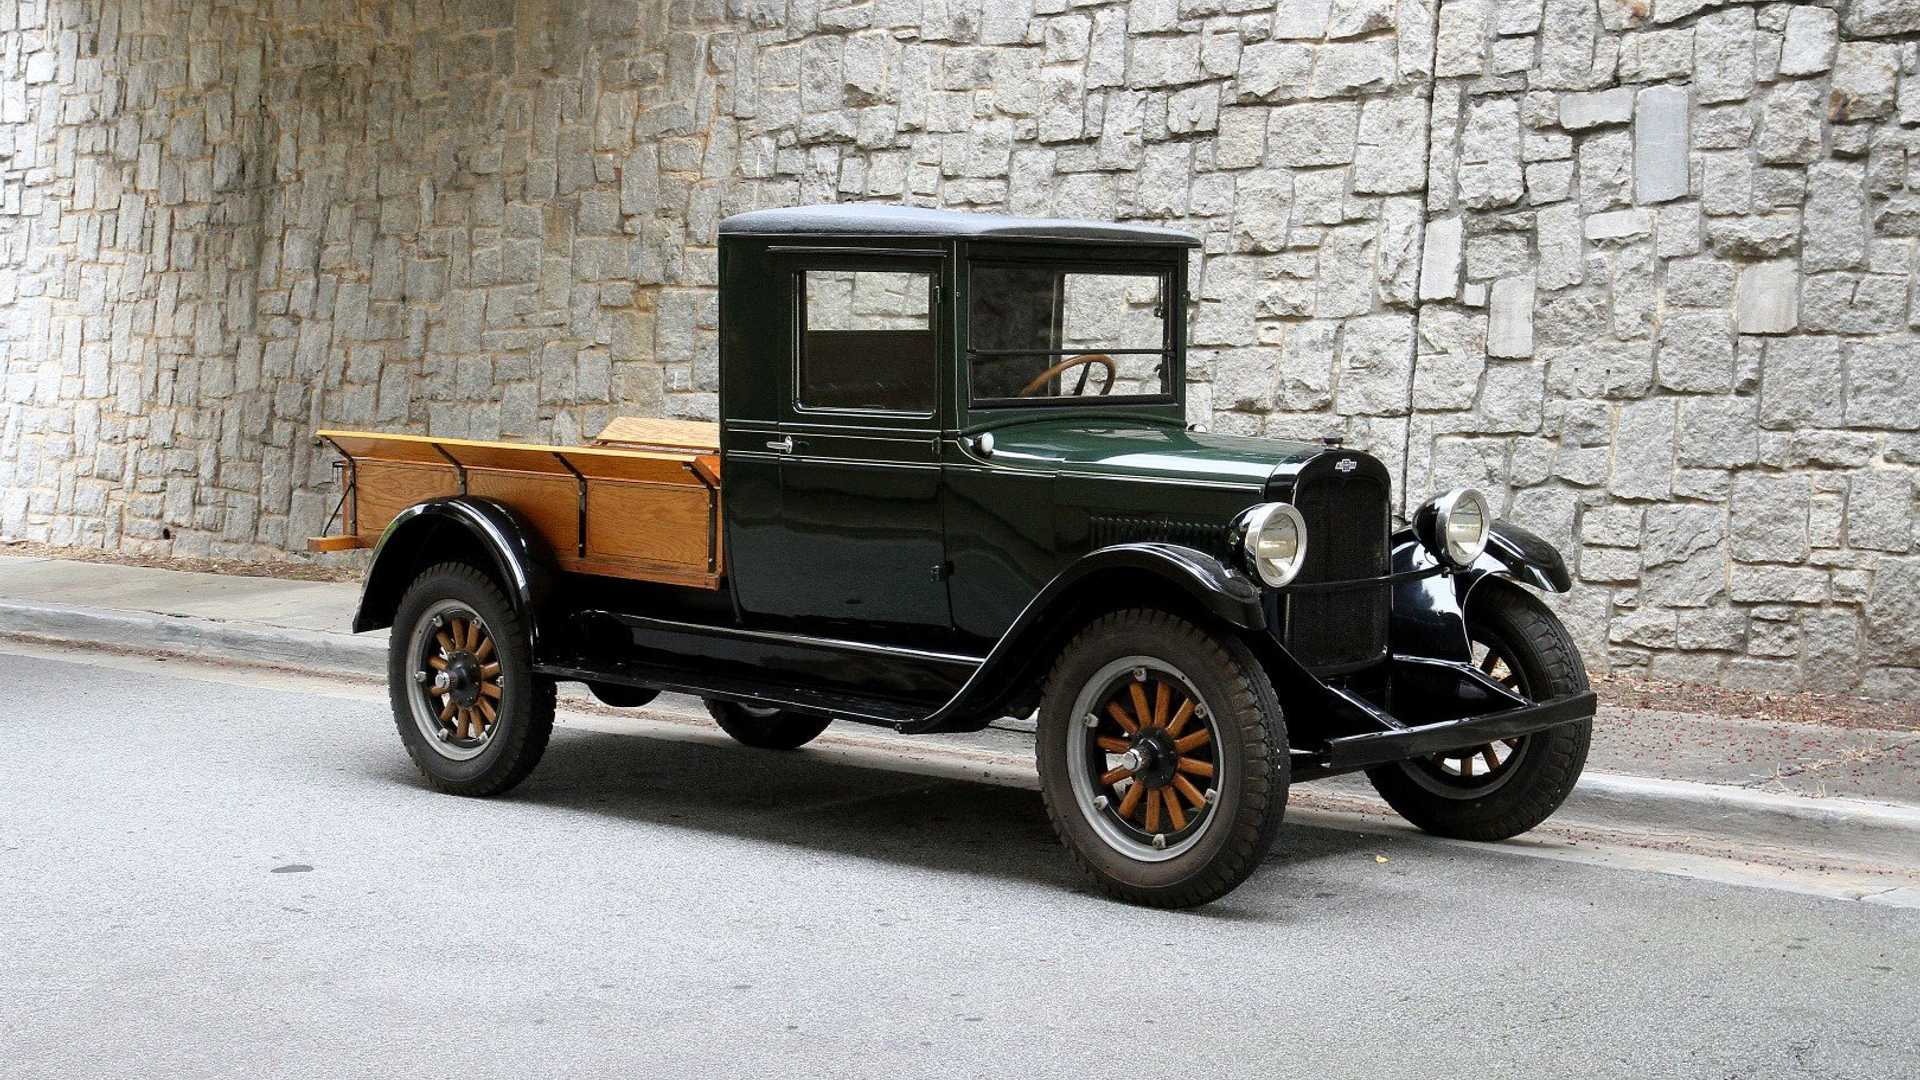 1920x1080 20 Of The Coolest Cars And Trucks From The Roaring '20s | Motorious